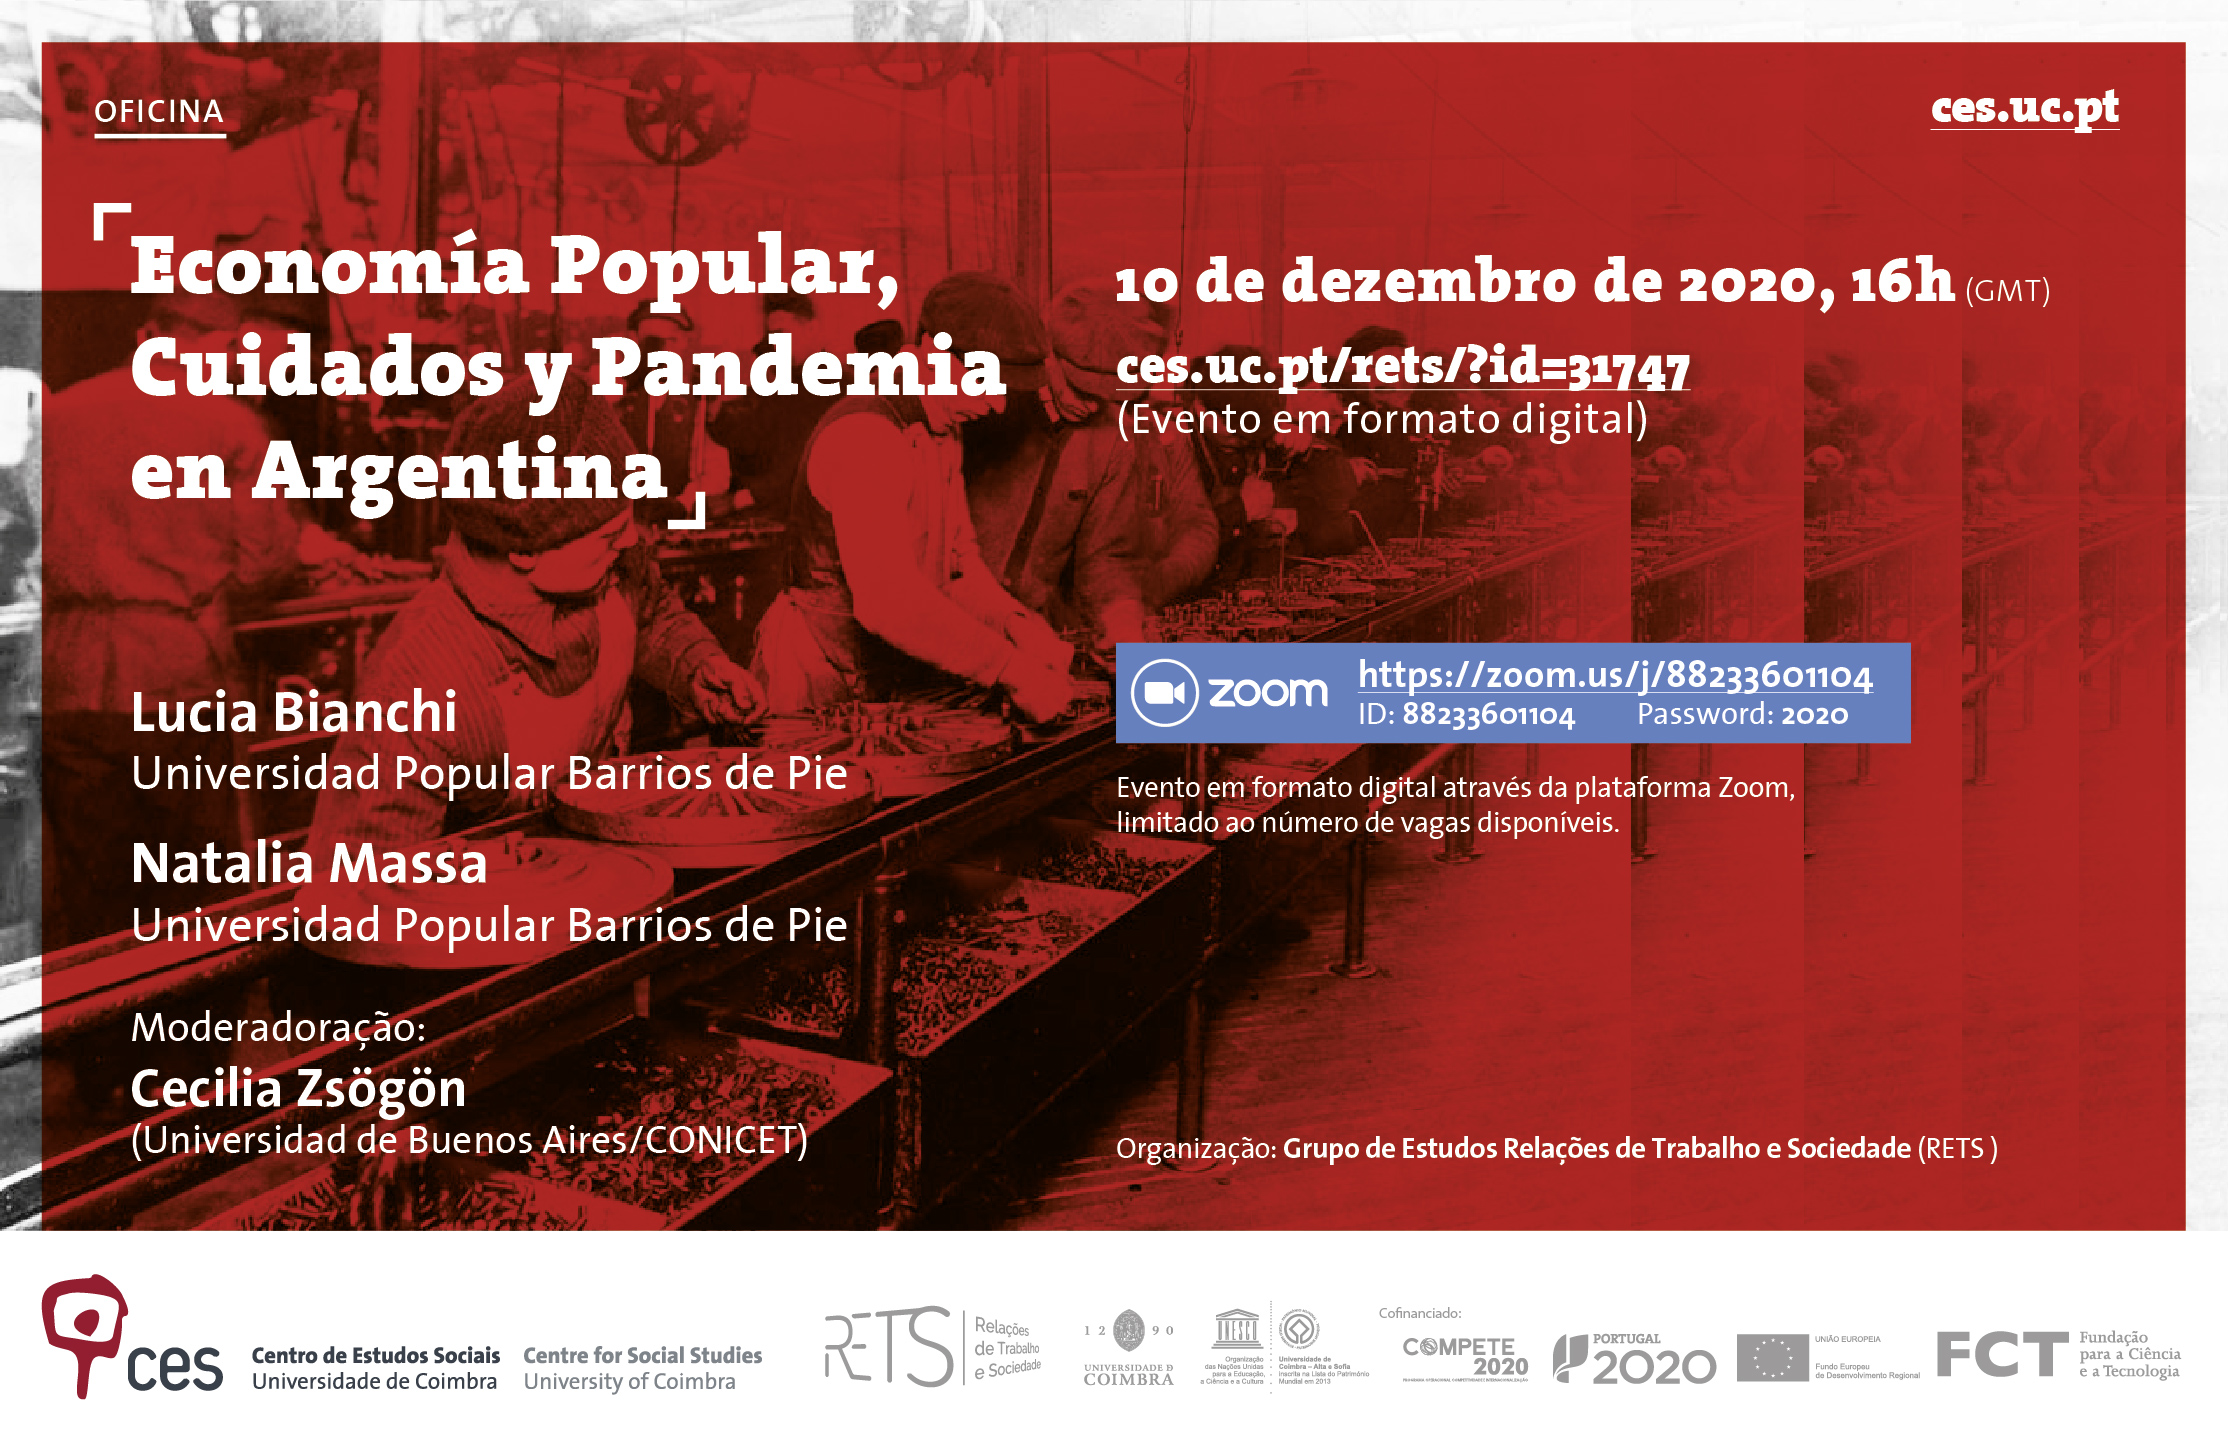 Popular Economy, Care and Pandemic in Argentina<span id="edit_31747"><script>$(function() { $('#edit_31747').load( "/myces/user/editobj.php?tipo=evento&id=31747" ); });</script></span>